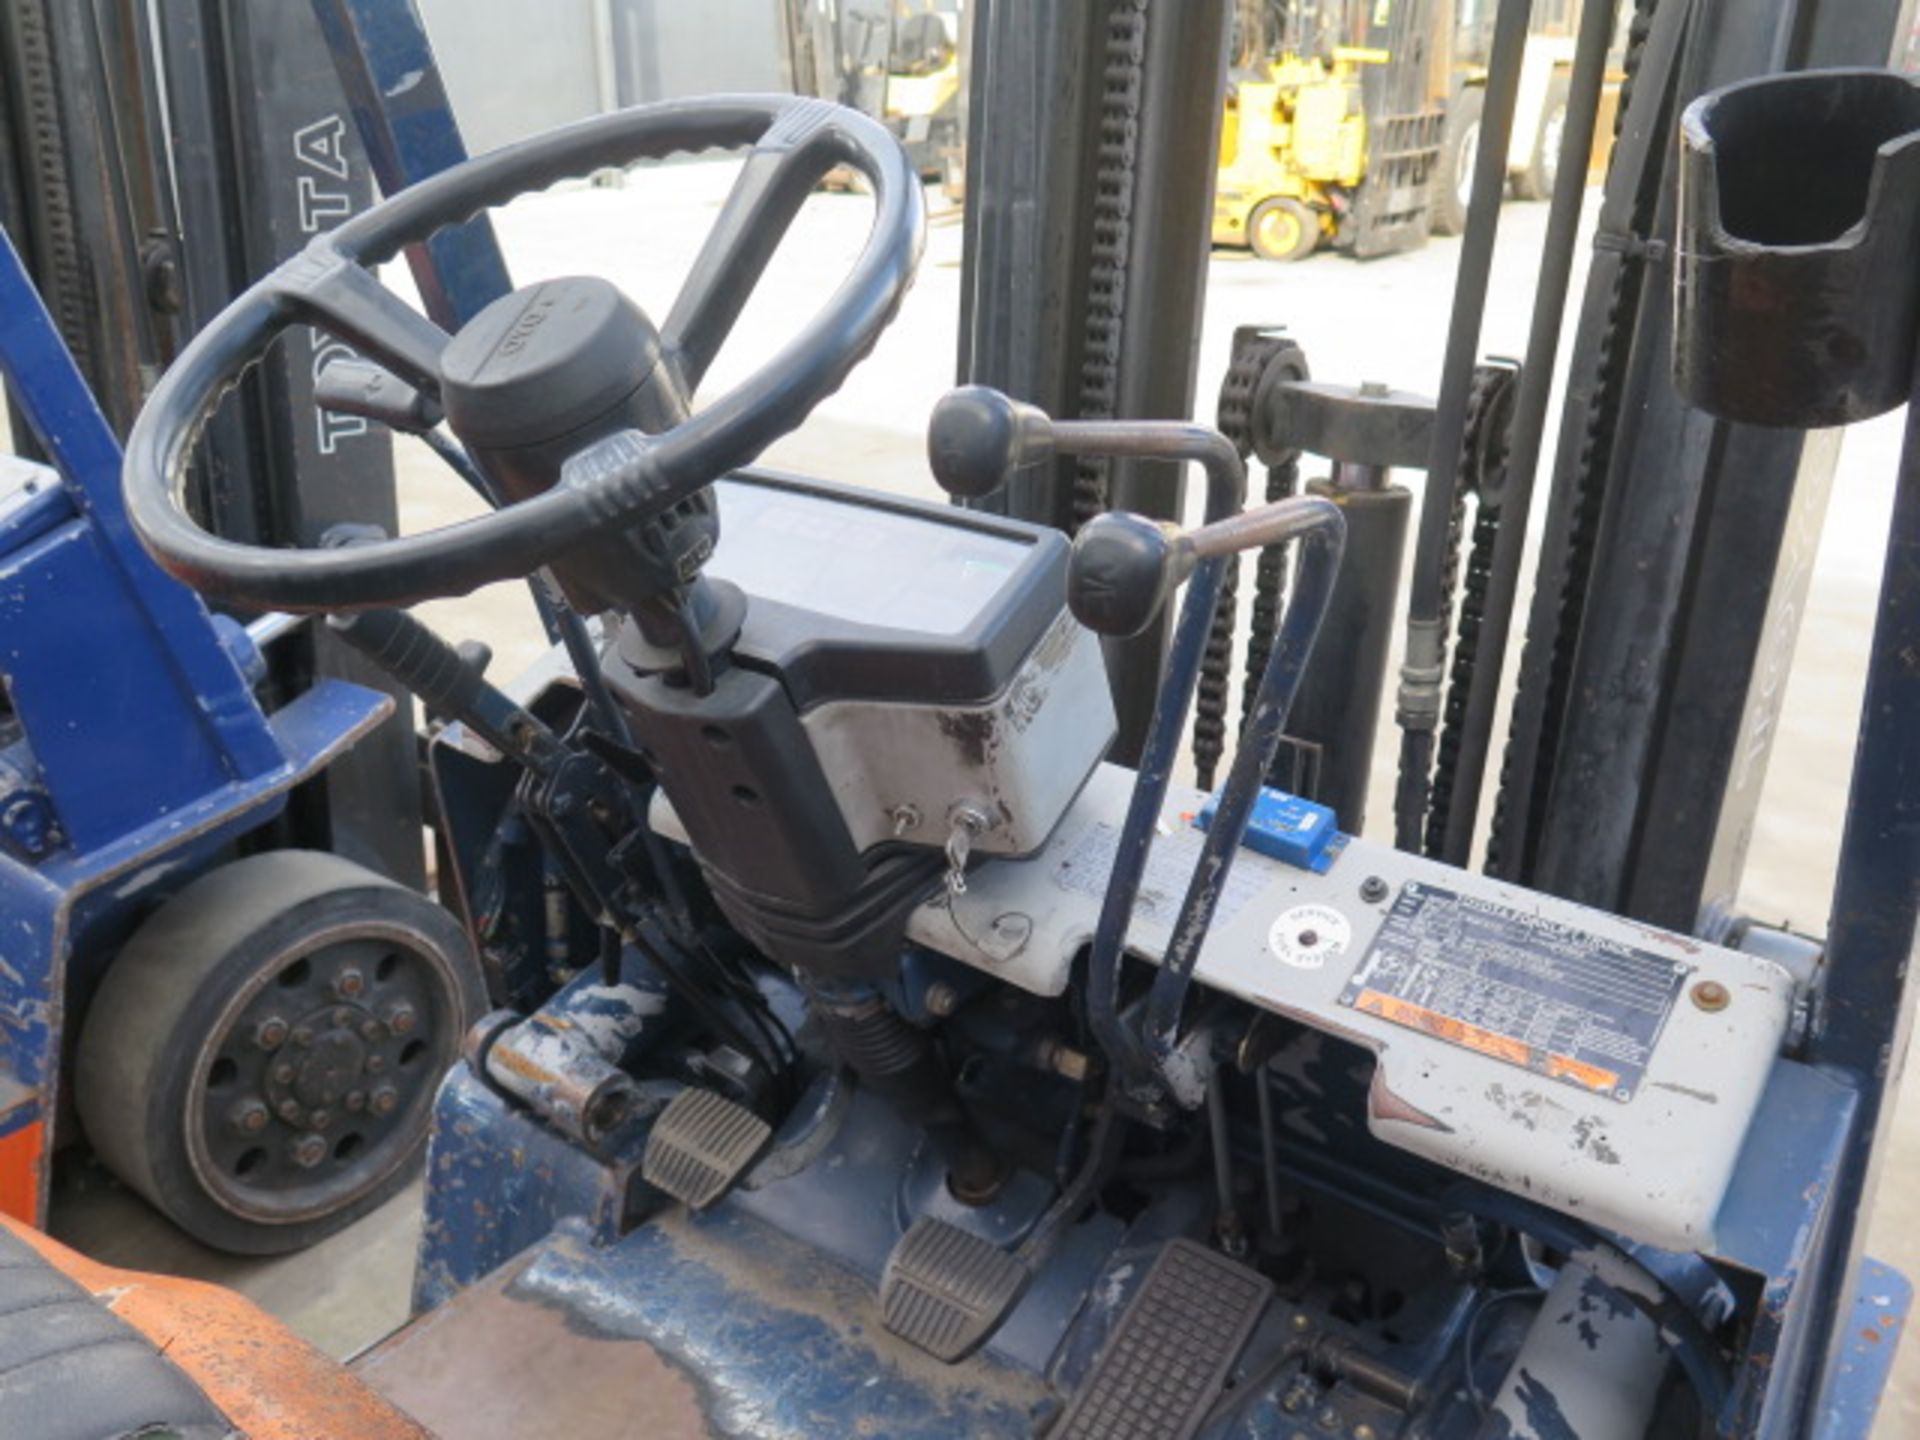 Toyota 5FGC25 5000 Lb Cap LPG Forklift s/n 84733 w/ 3-Stage Mast, 197" Lift Height, Cushion Tires, - Image 8 of 11